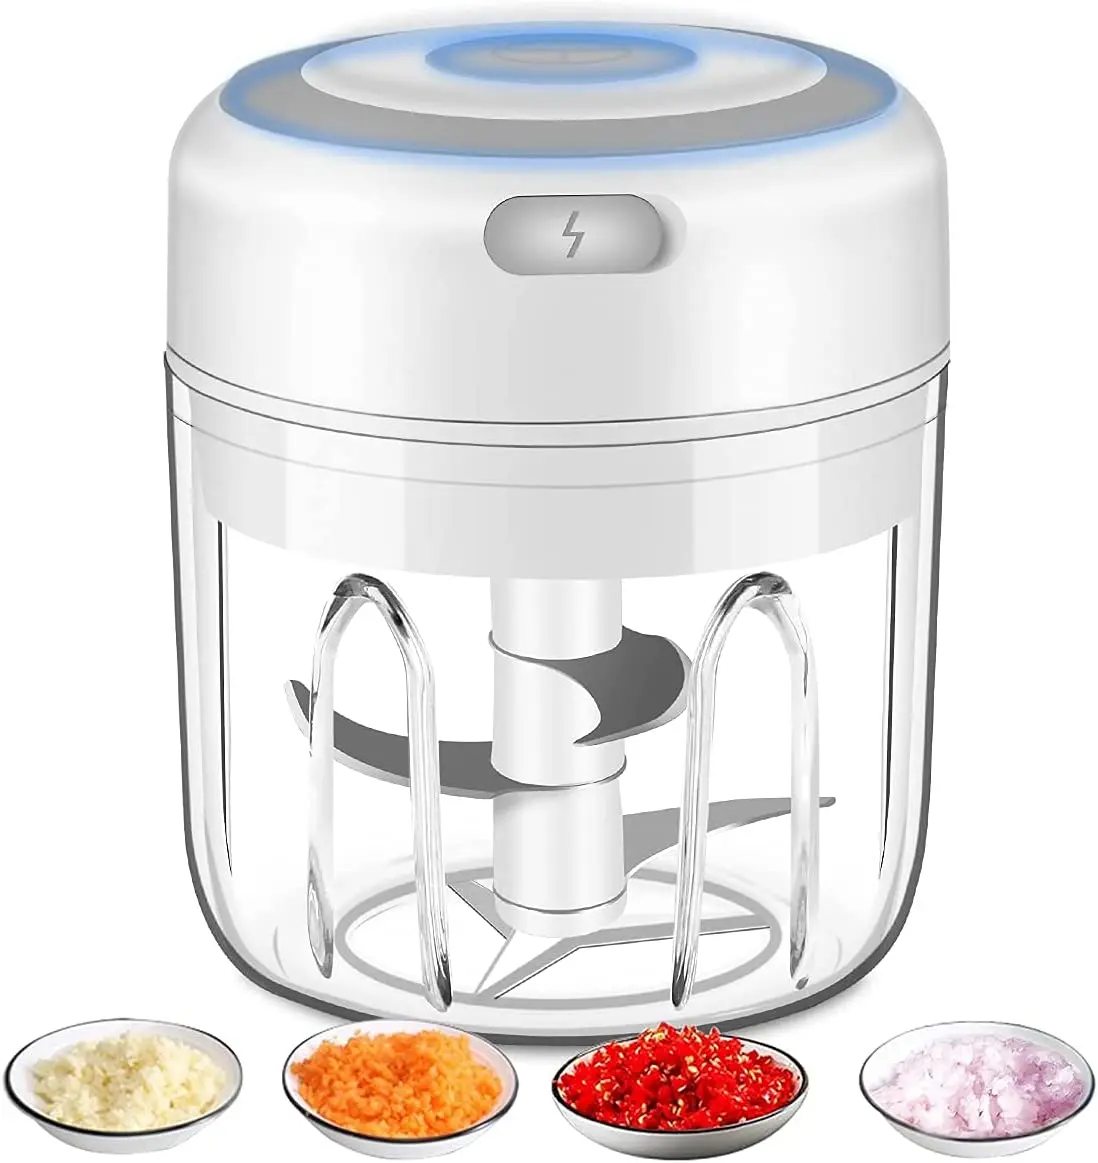 Electric Mini Garlic Chopper, Portable Food Processor, Vegetable Chopper Onion Mincer, Cordless Meat Grinder with USB Charging